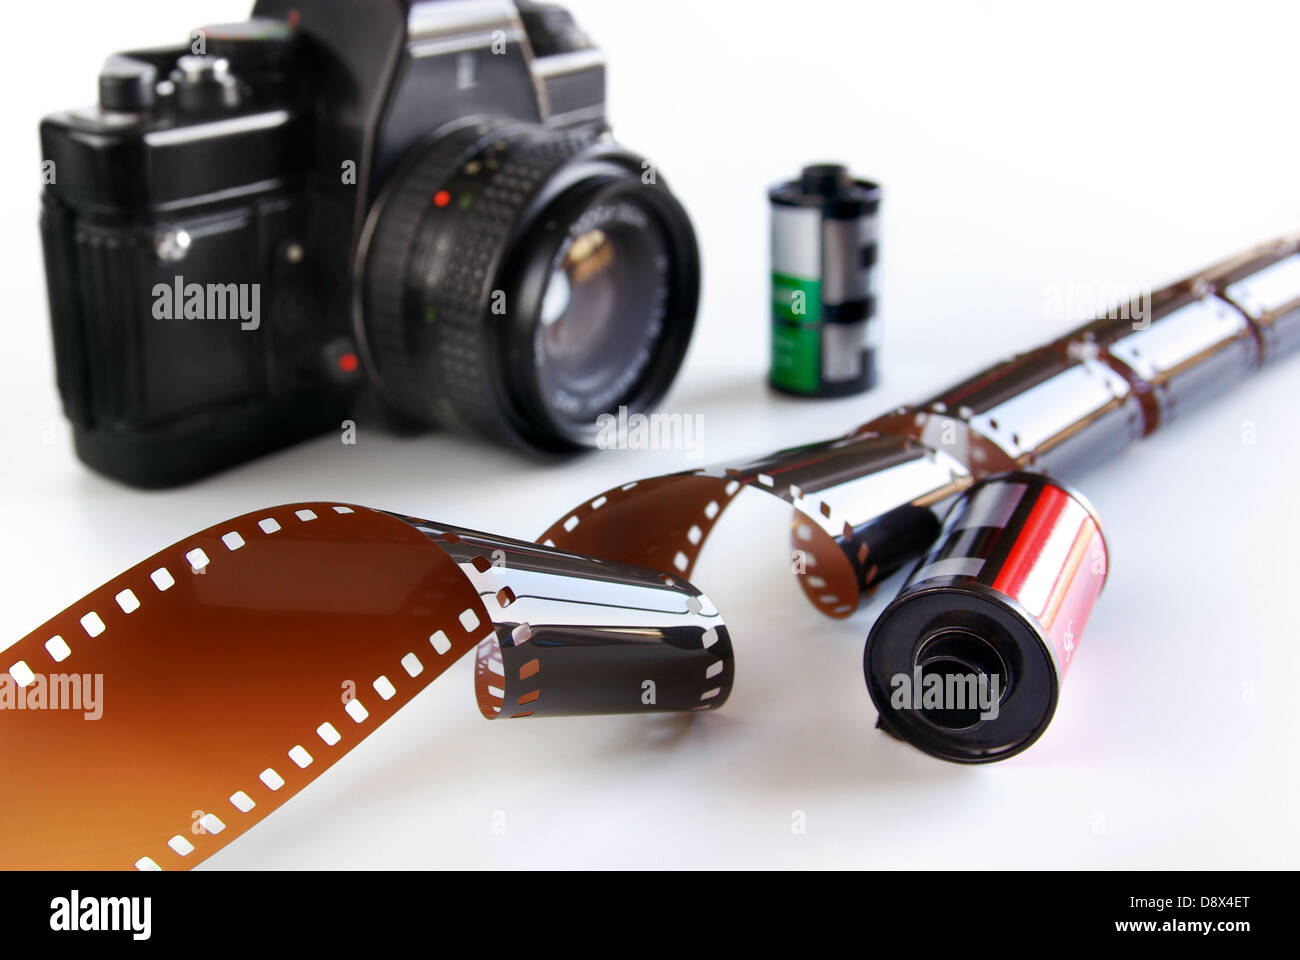 Classic analog photography equipment over a white background Stock Photo